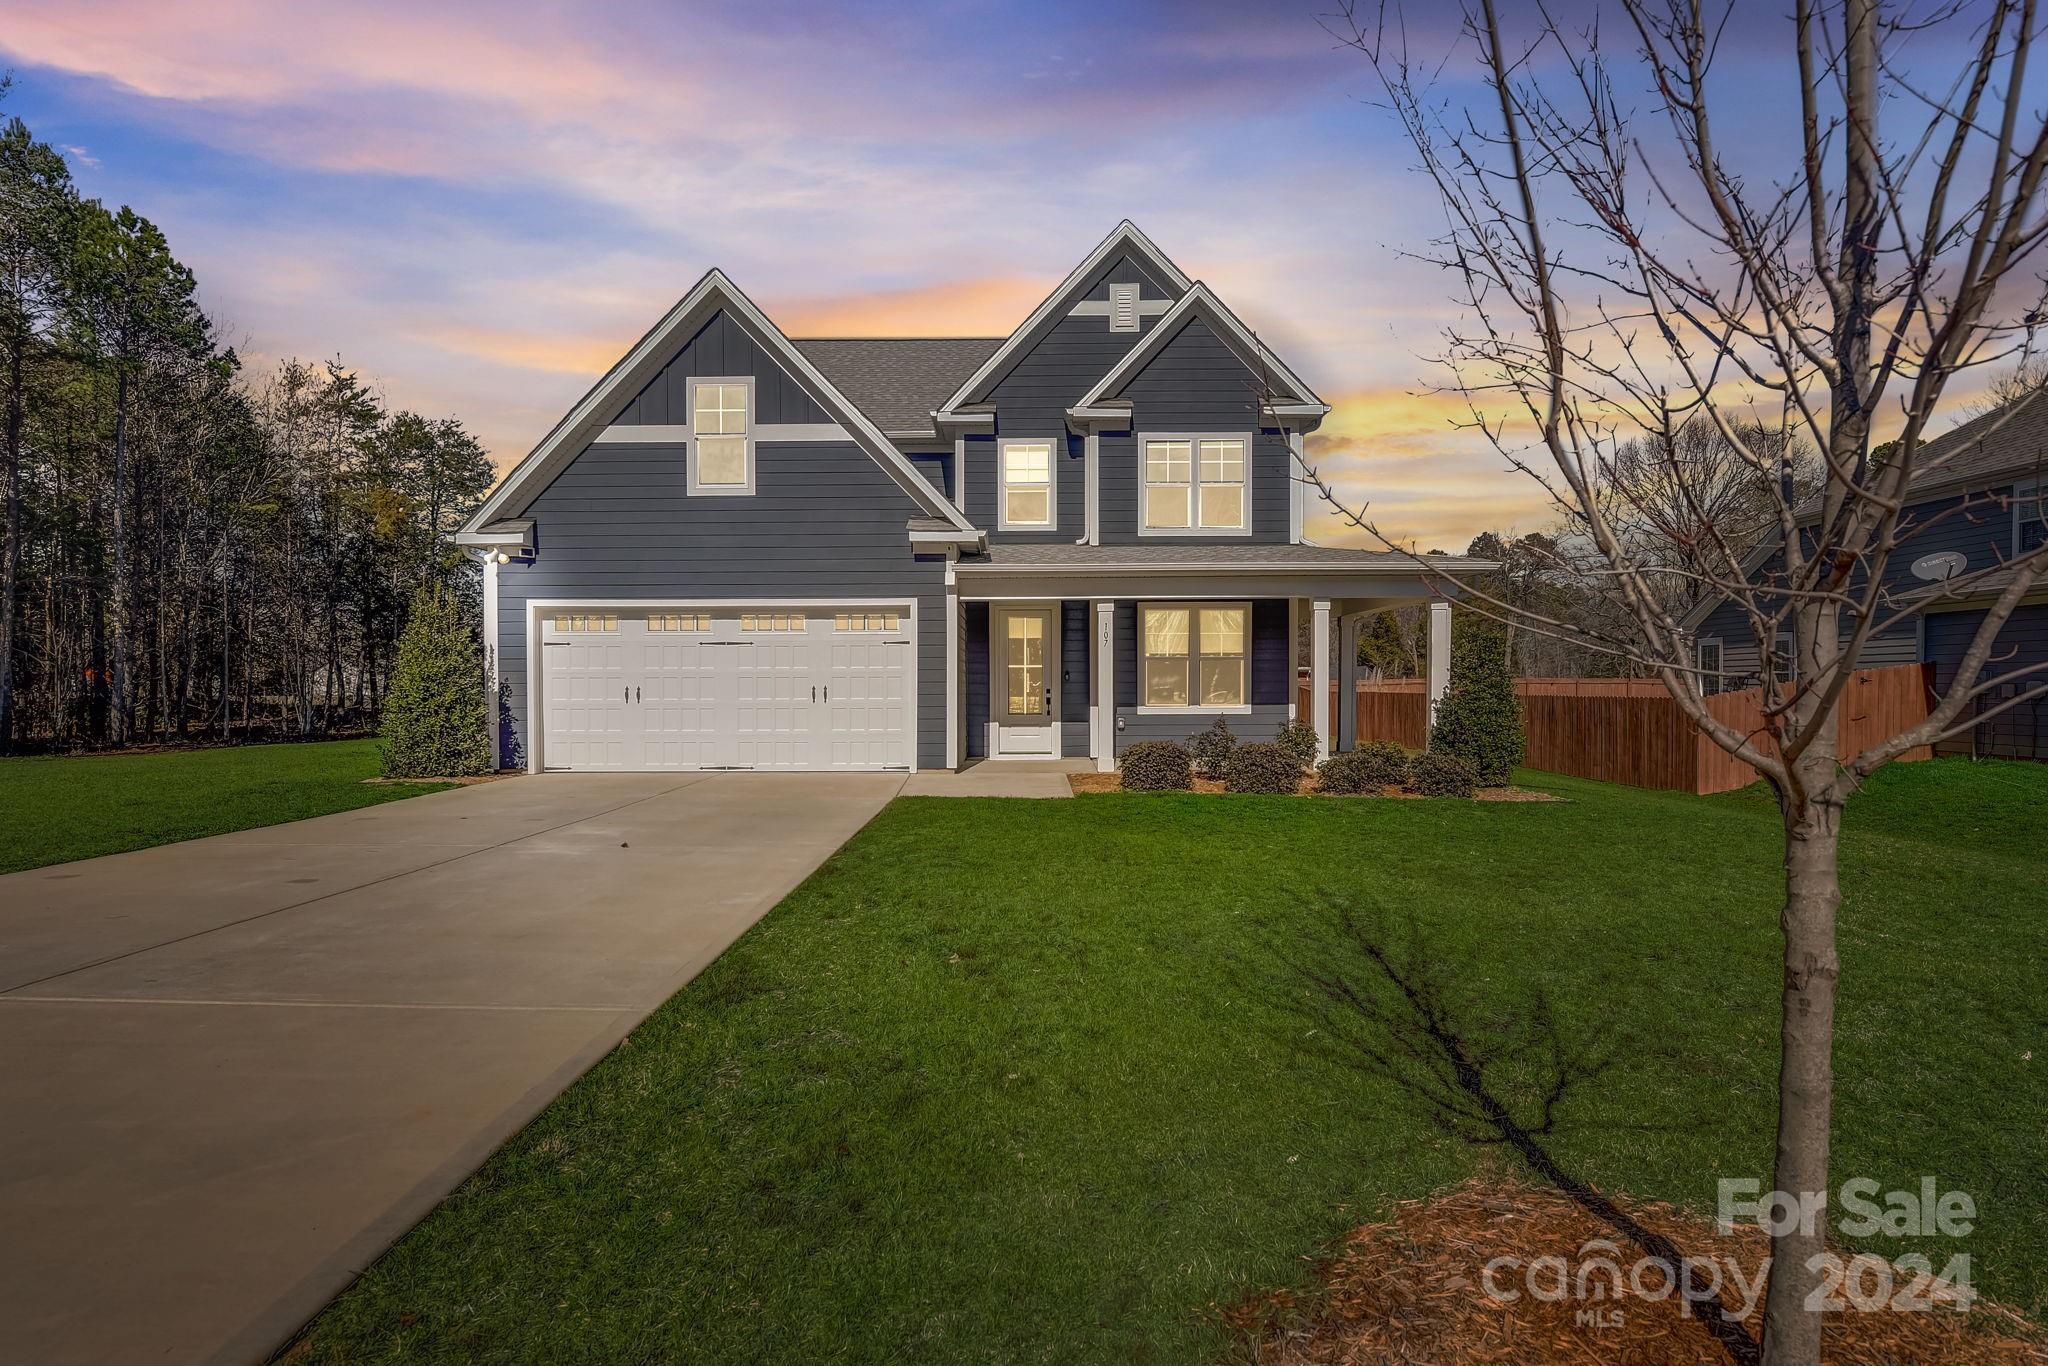 Photo one of 107 Collins Grove Ct Mooresville NC 28115 | MLS 4108580